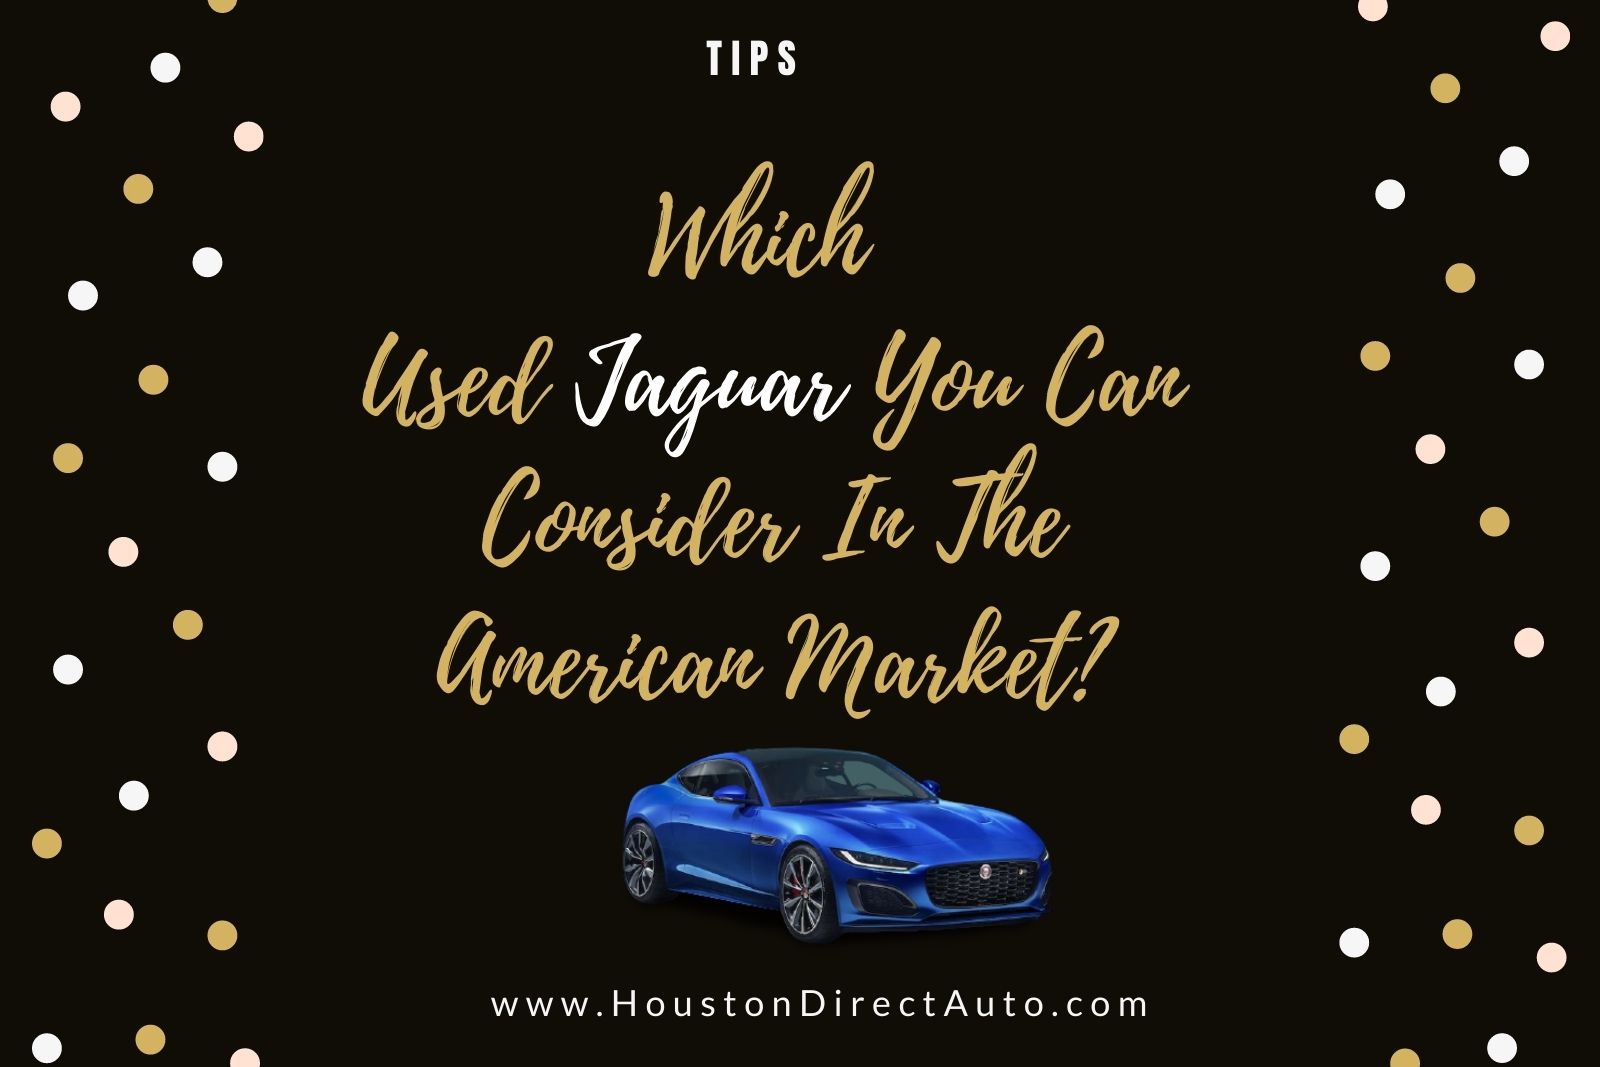 Which Used Jaguar For Sale You Can Consider In The American Market?